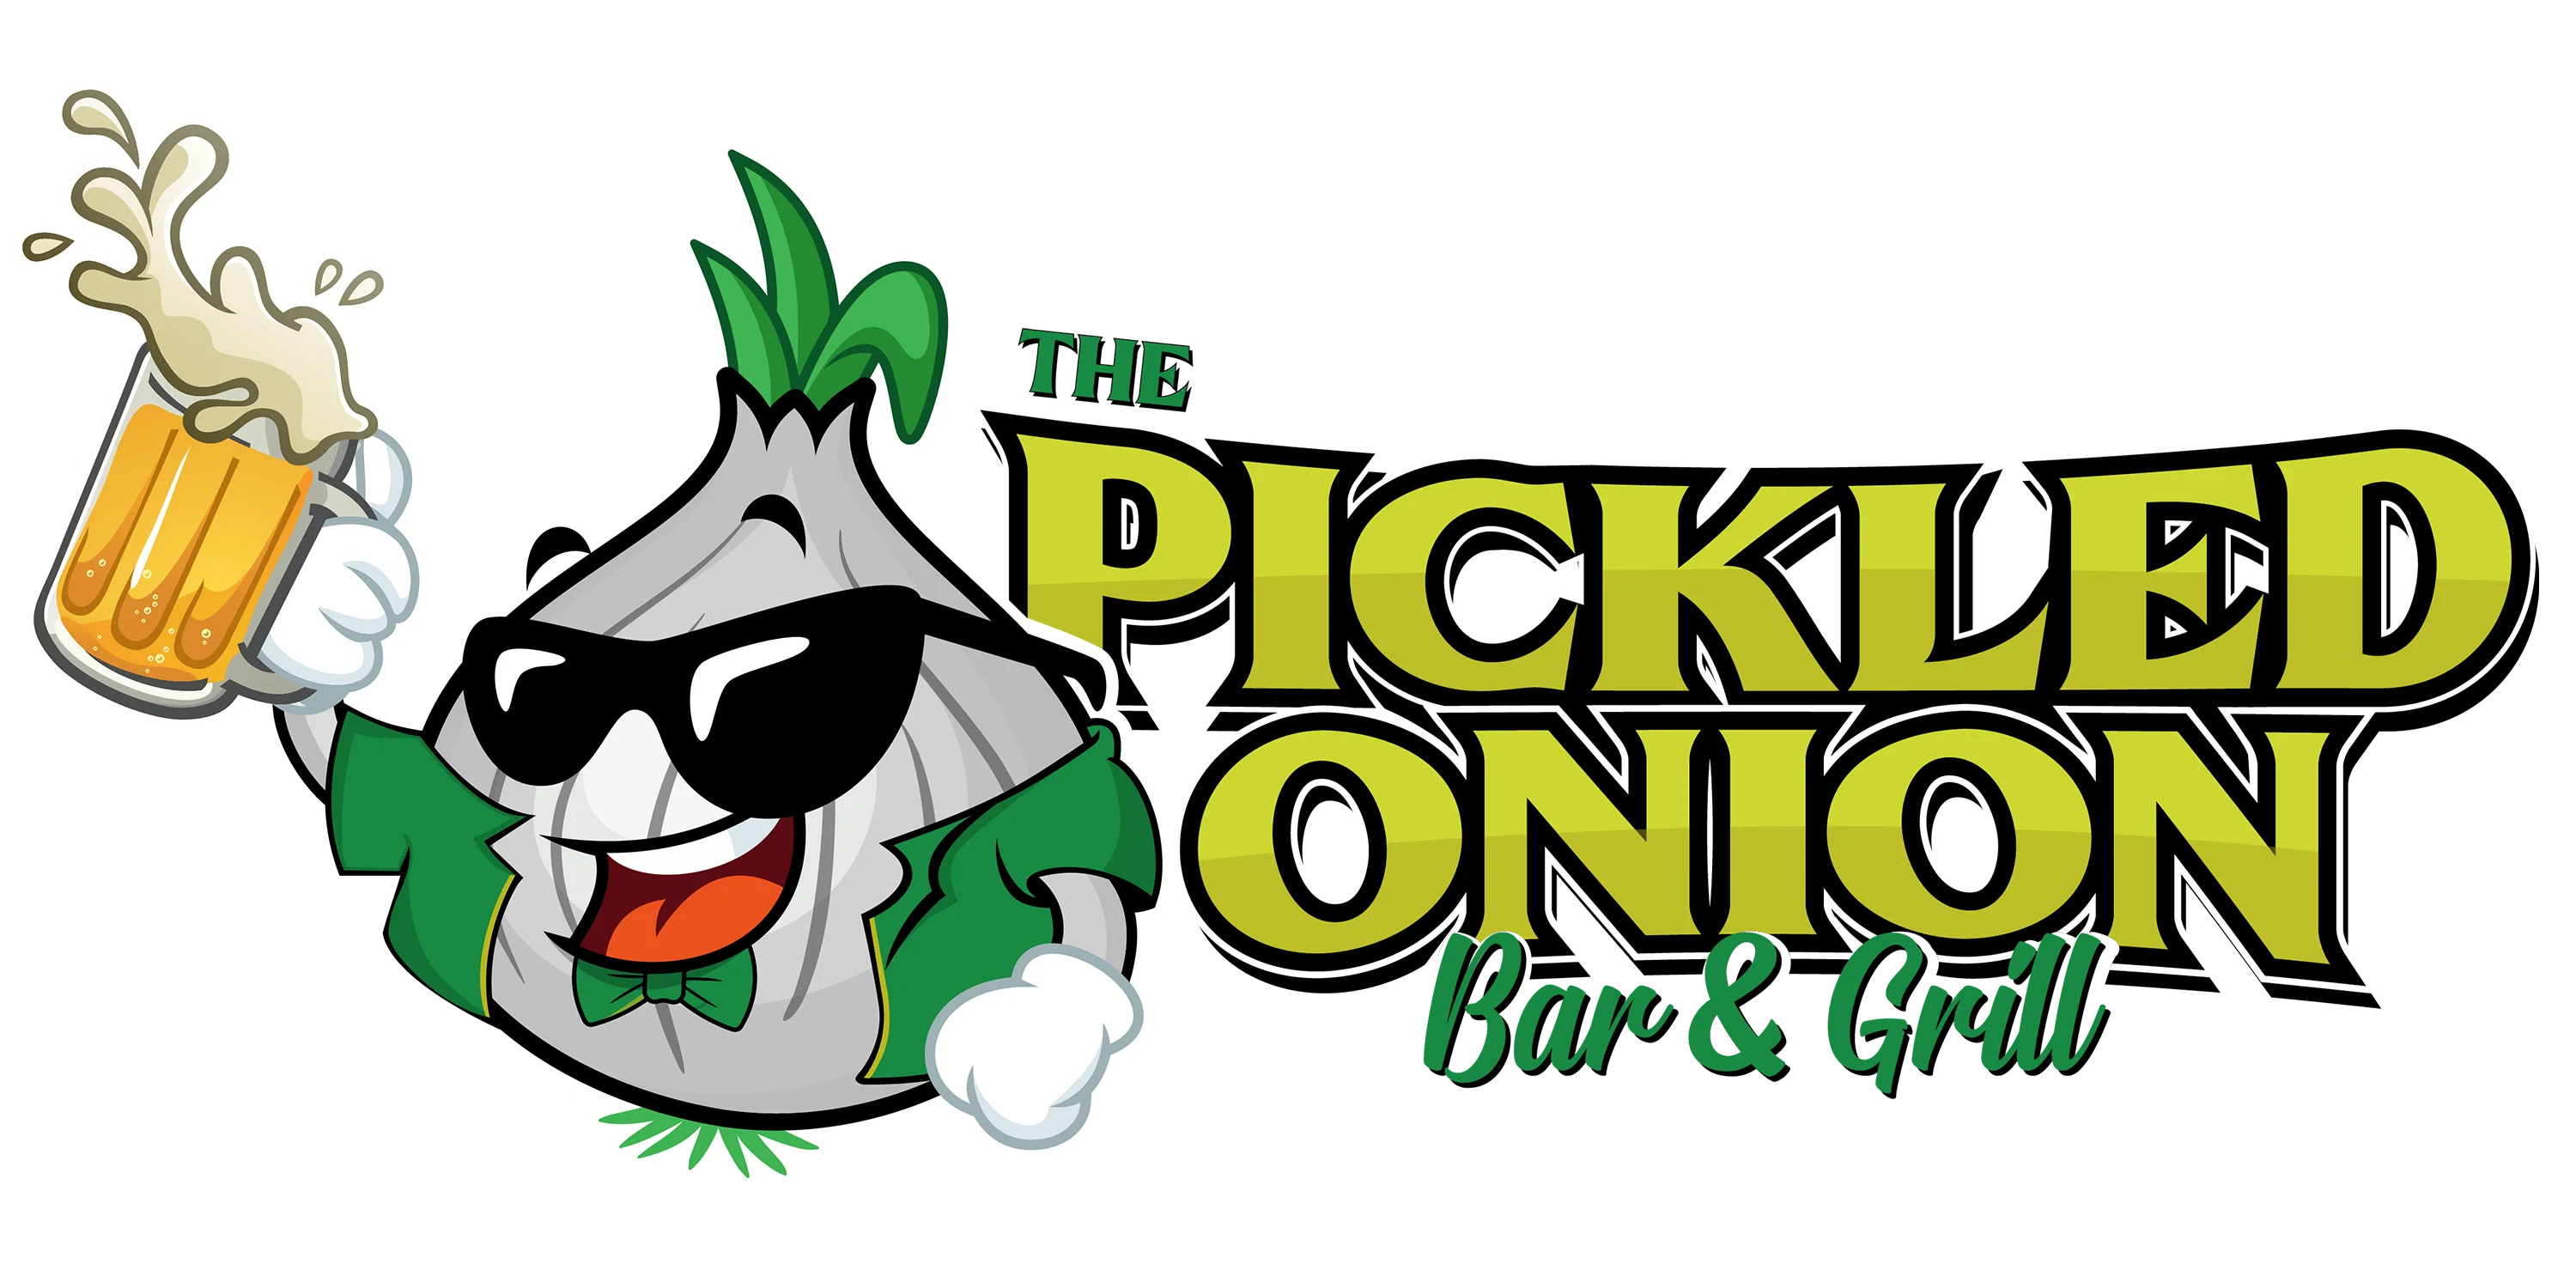 The Pickled Onion logo top